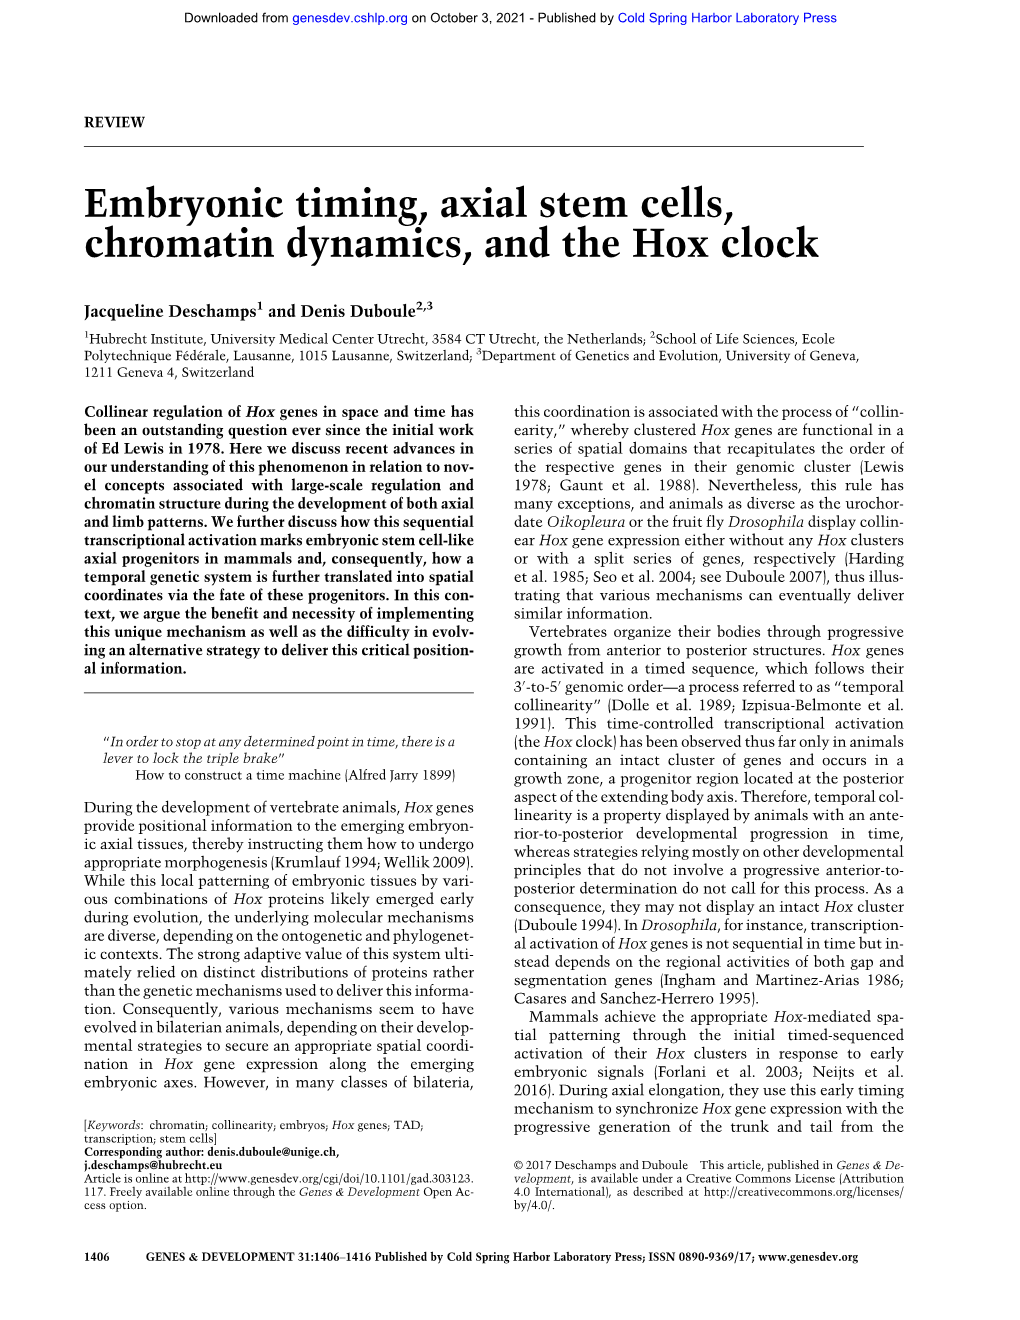 Embryonic Timing, Axial Stem Cells, Chromatin Dynamics, and the Hox Clock